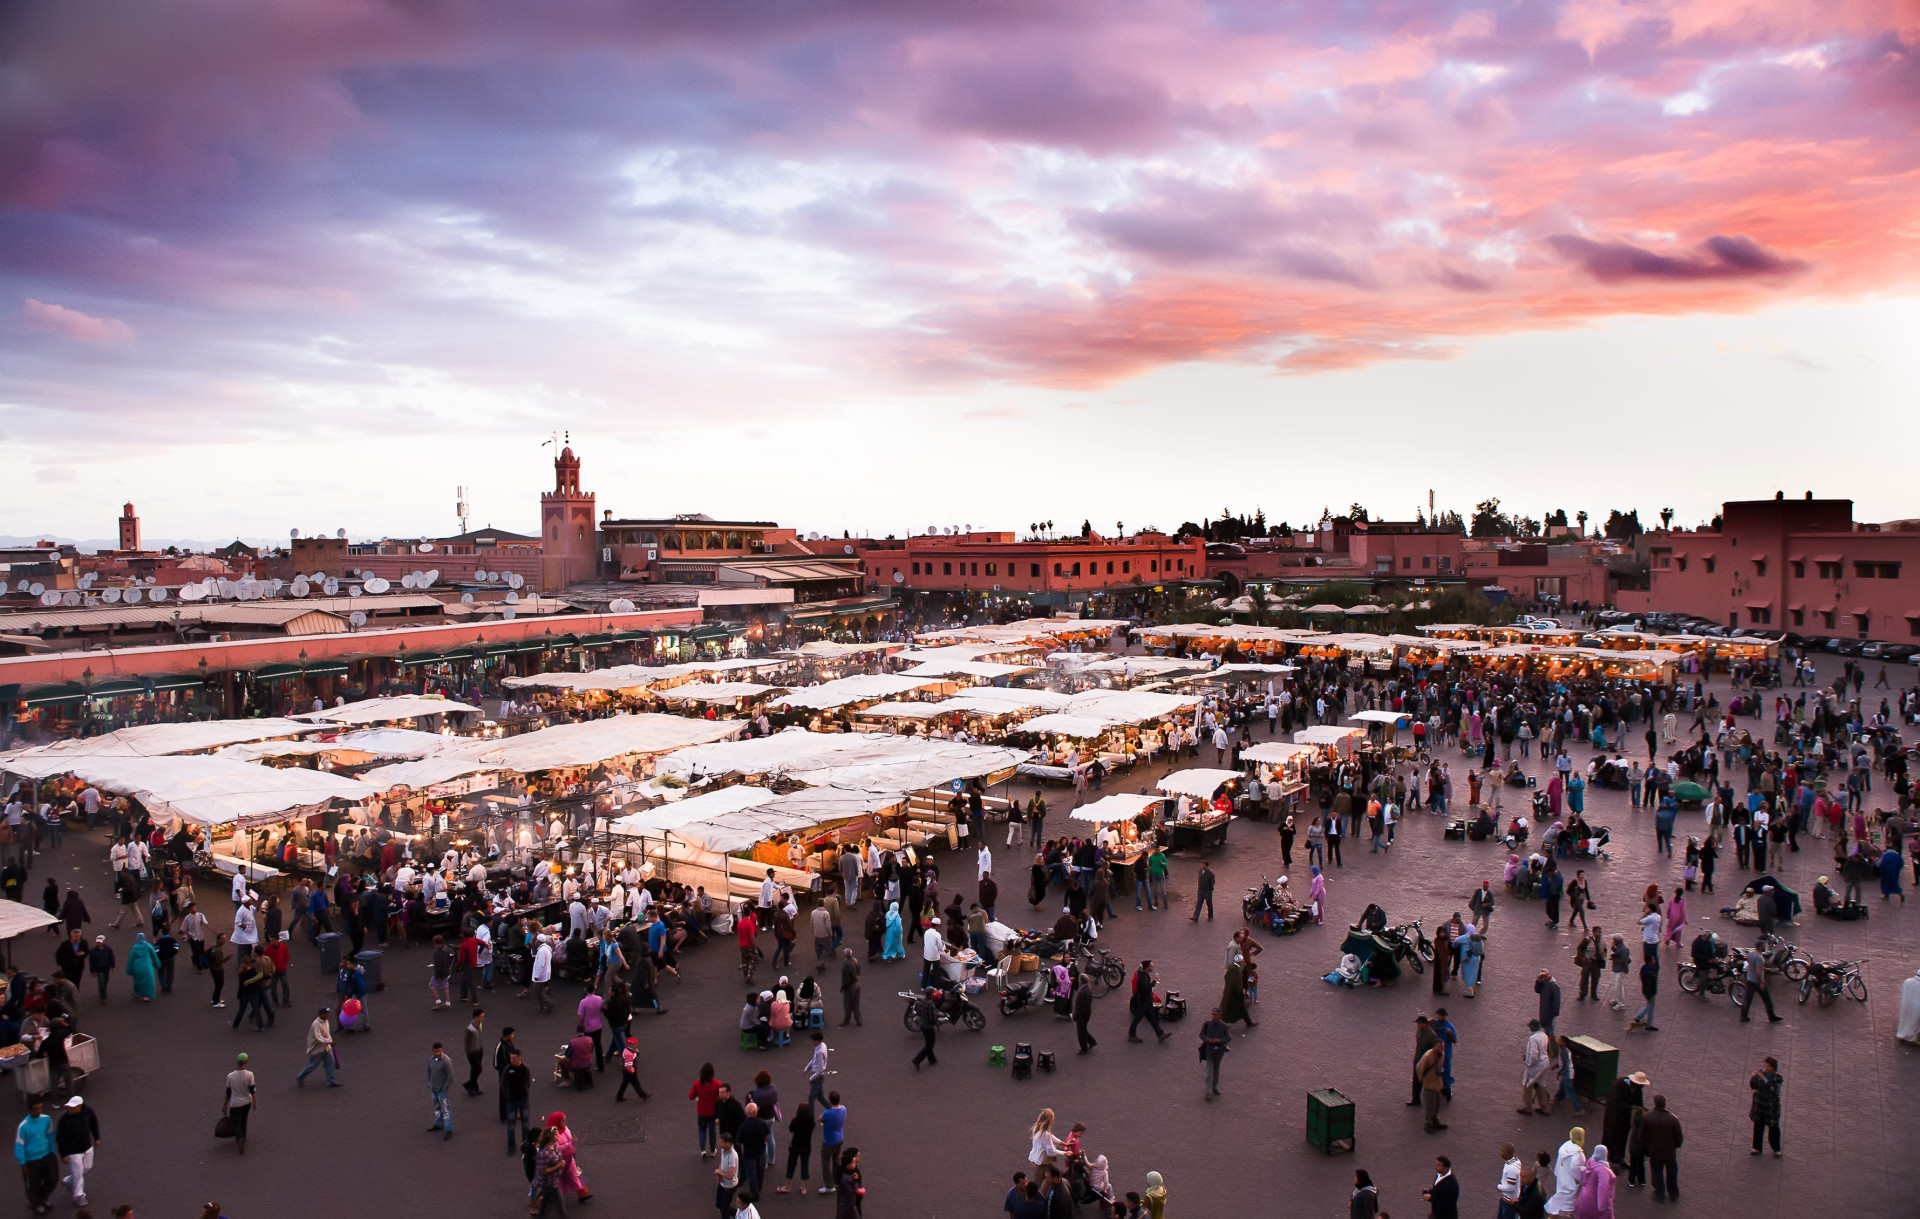 Another not-to-be-missed spot is the Jemaa el-Fnaa square, with its bustling businesses, music, and snake charmers.<p>You may also like:<a href="https://www.starsinsider.com/n/293006?utm_source=msn.com&utm_medium=display&utm_campaign=referral_description&utm_content=208346v2en-sg"> Get to know Europe's sunniest destination</a></p>